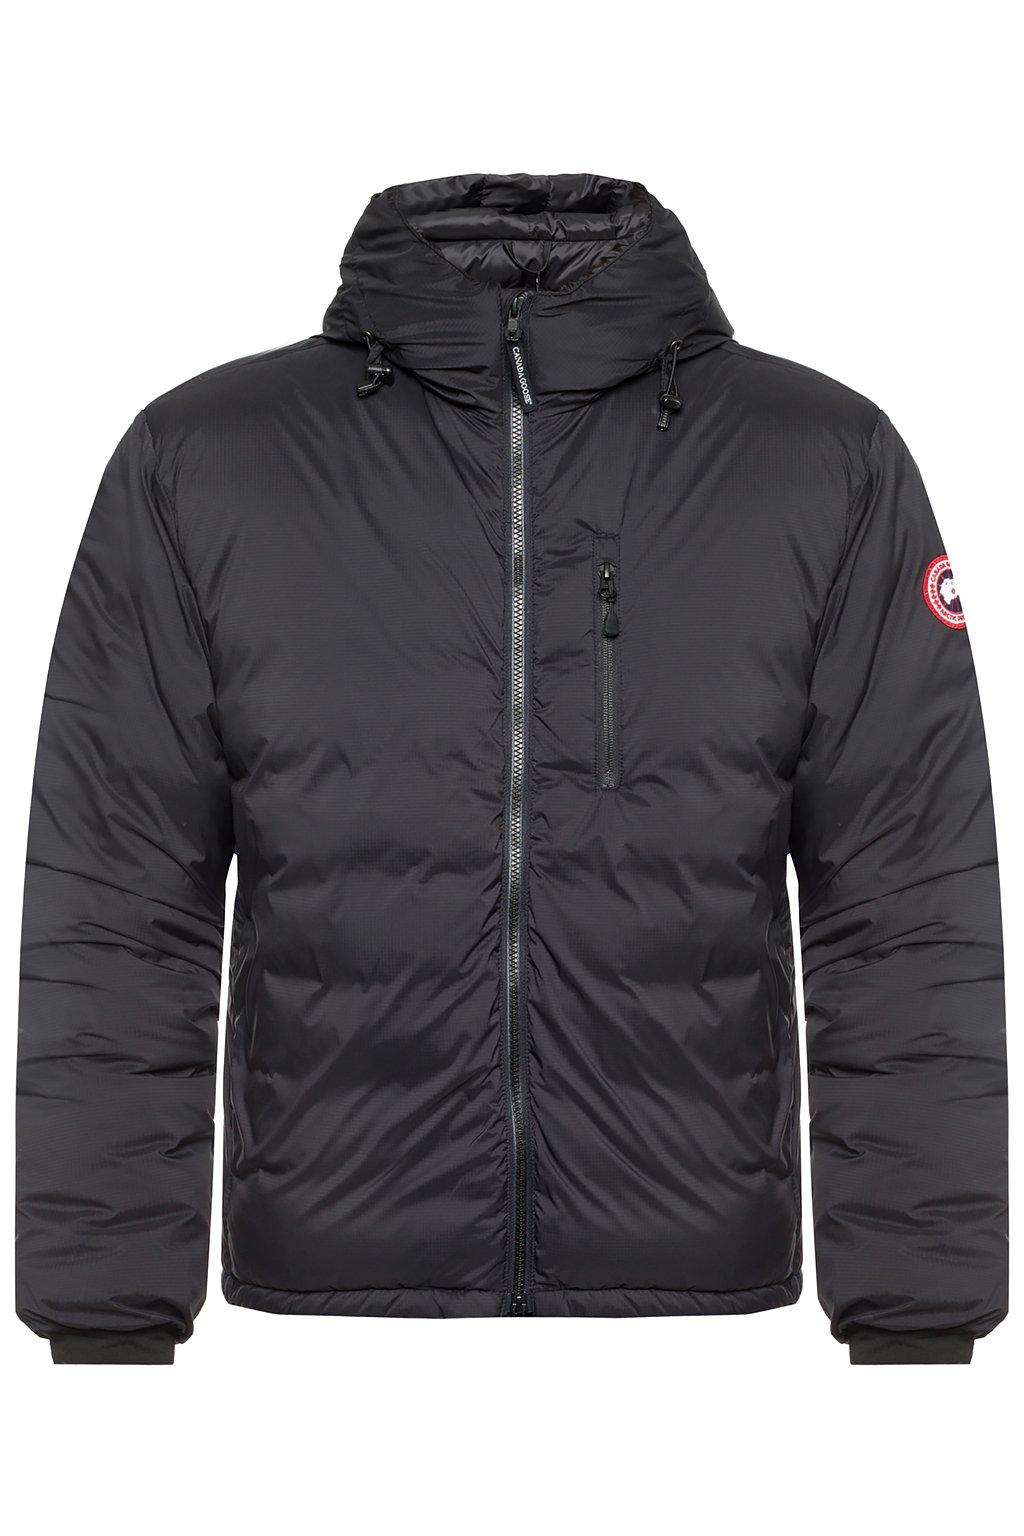 Canada Goose Goose 'lodge' Logo-patched Jacket in Black for Men - Lyst